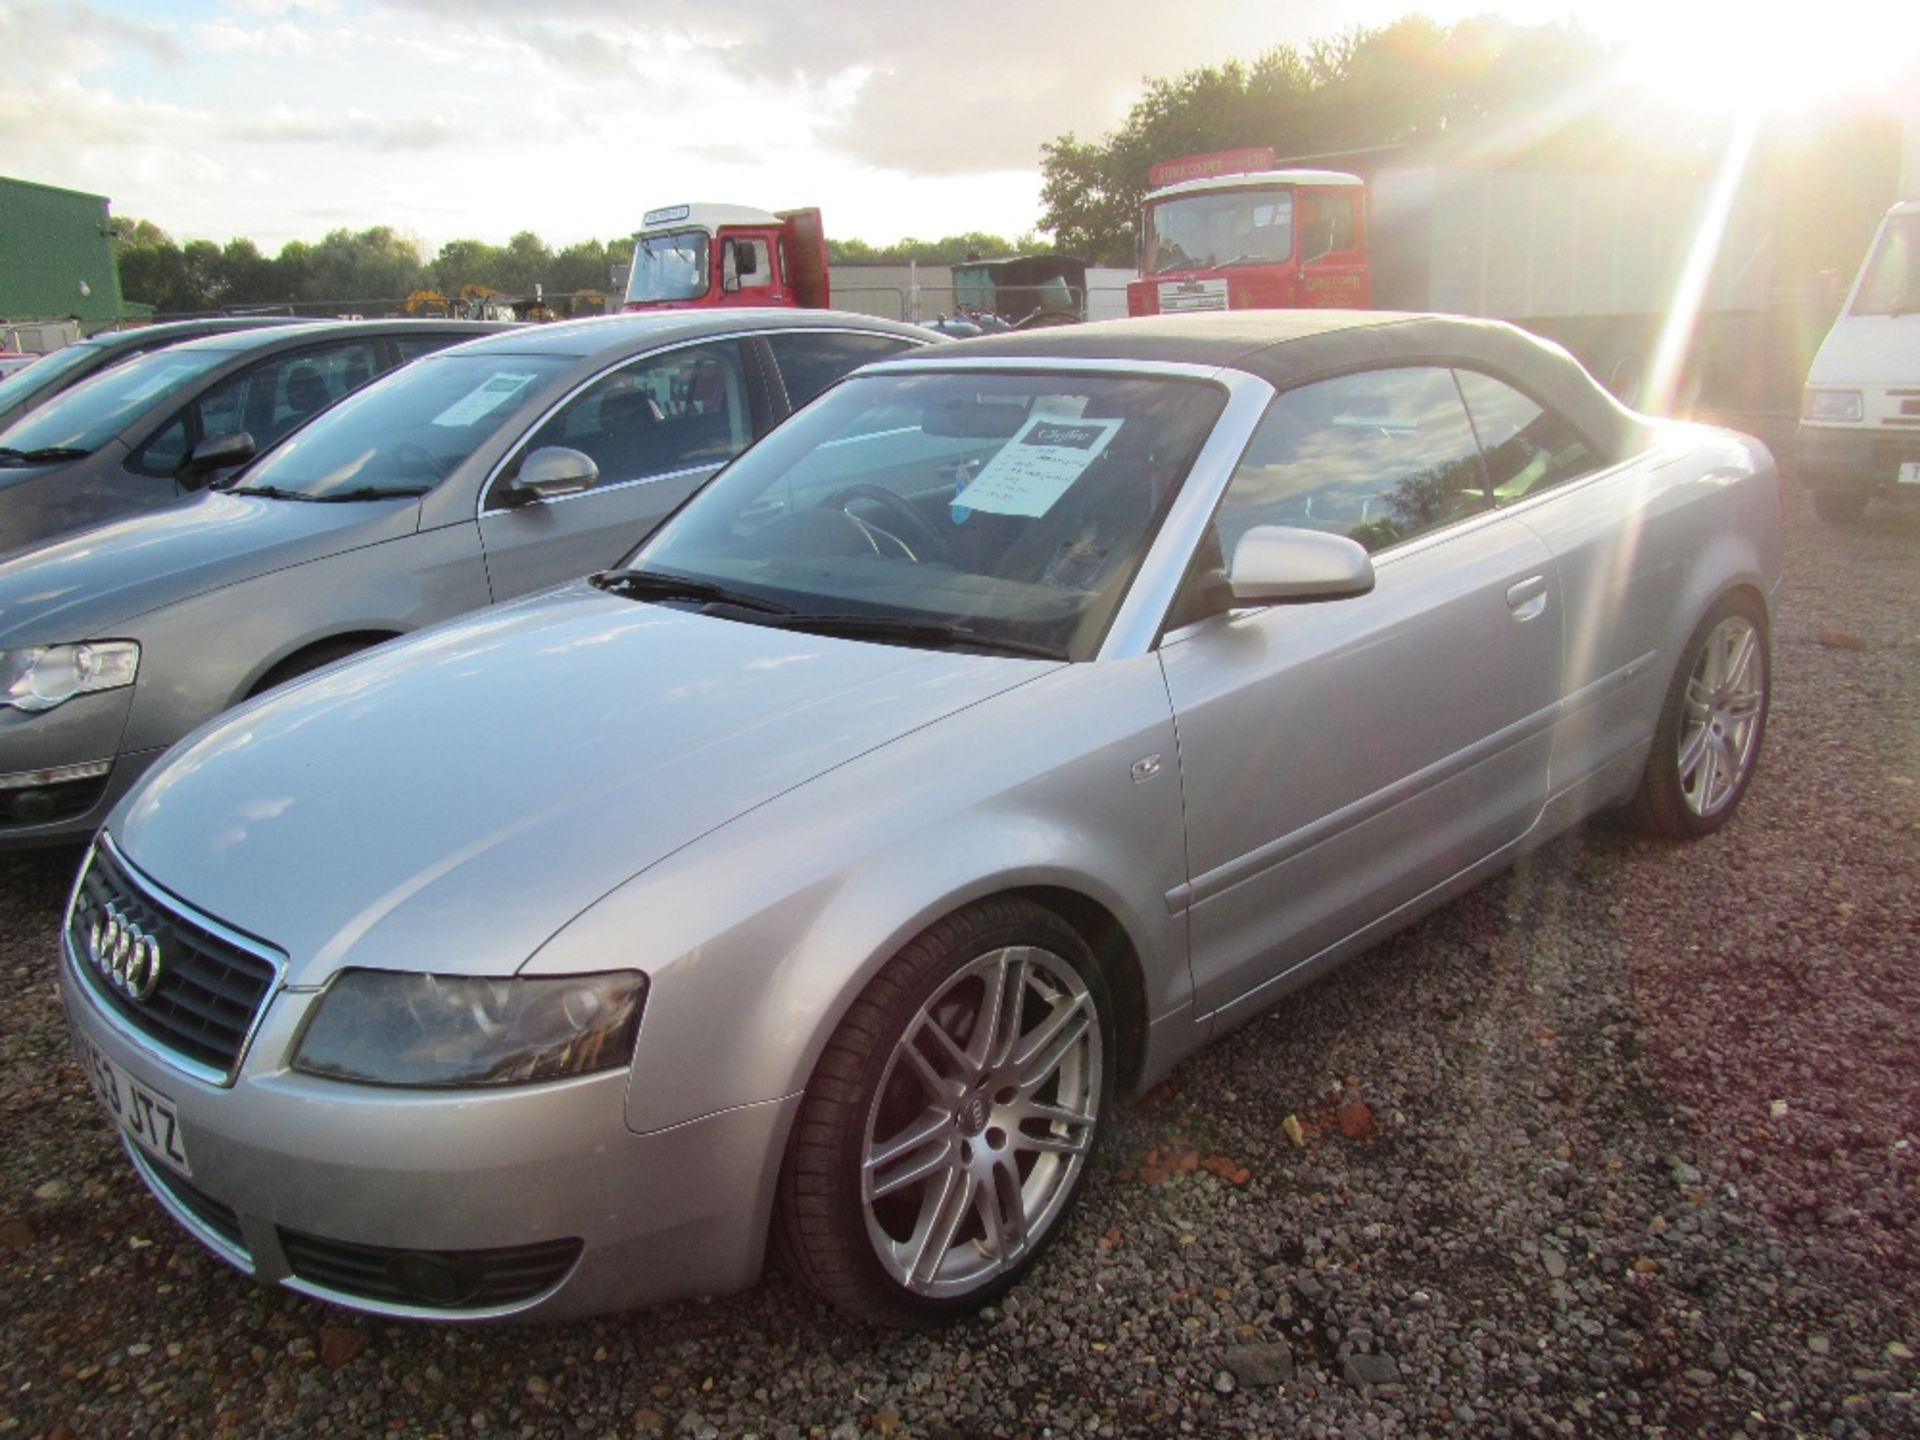 Audi A4 TDI Convertible. Registration Documents will be supplied. Mileage: 105,831. MOT till 21/8/